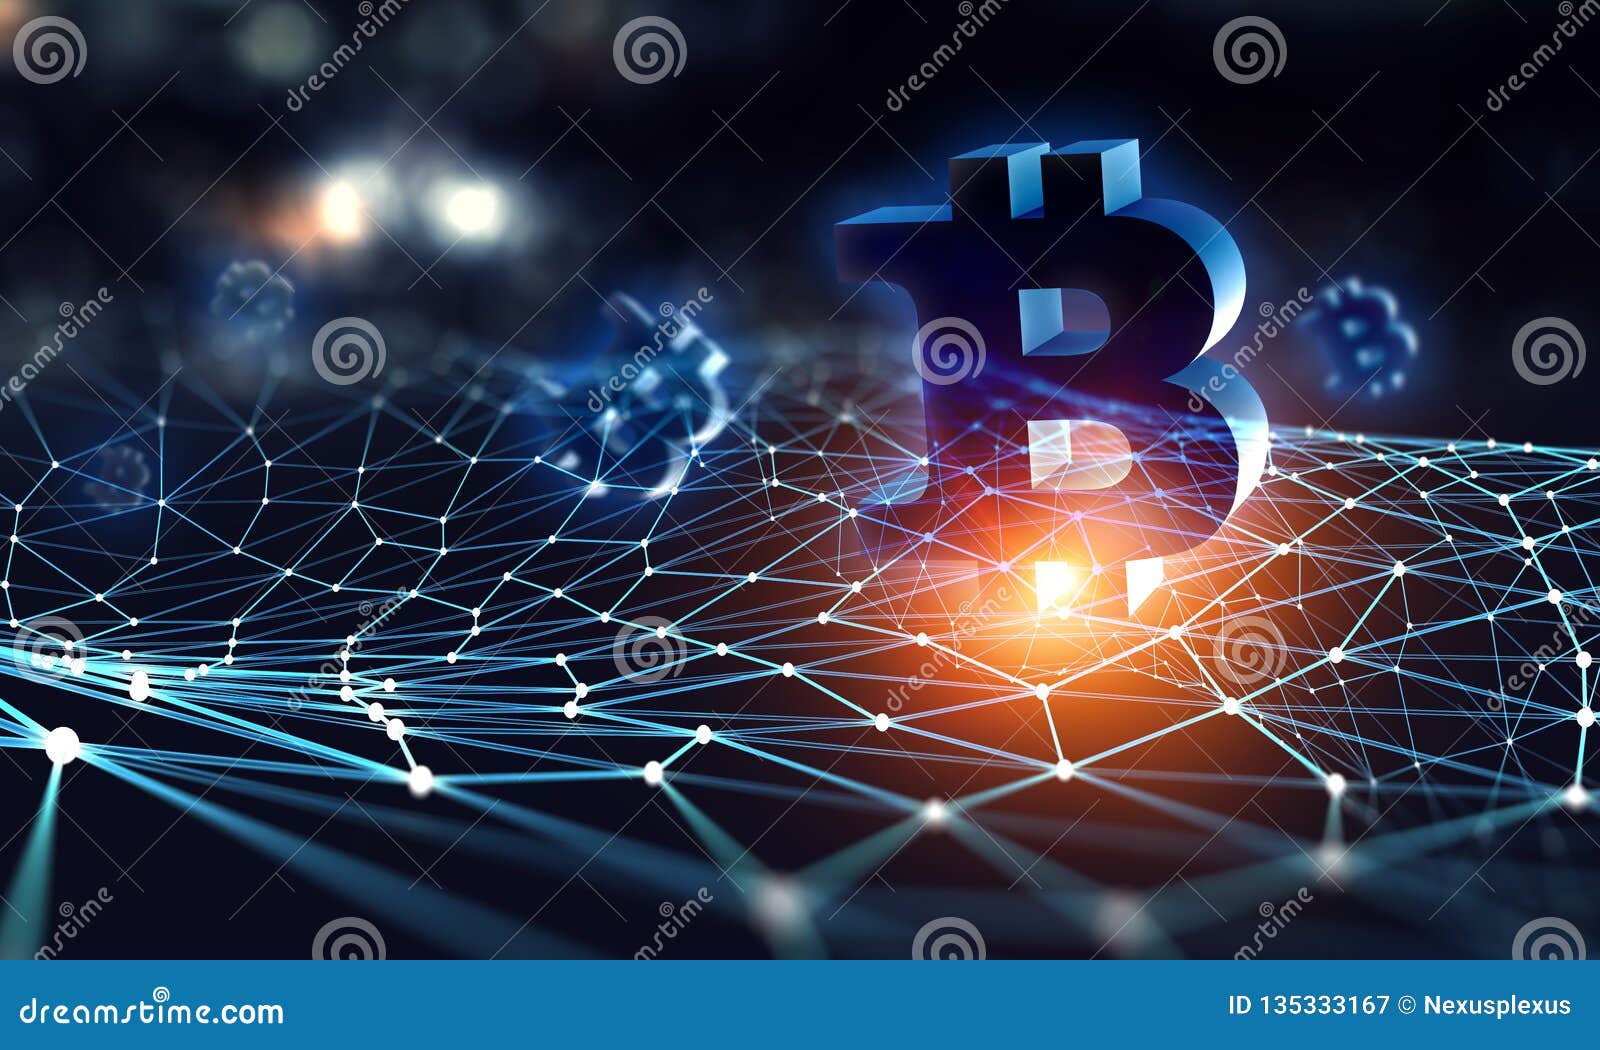 Cryptocurrency Background Concept Stock Image - Image of sign, exchange:  135333167